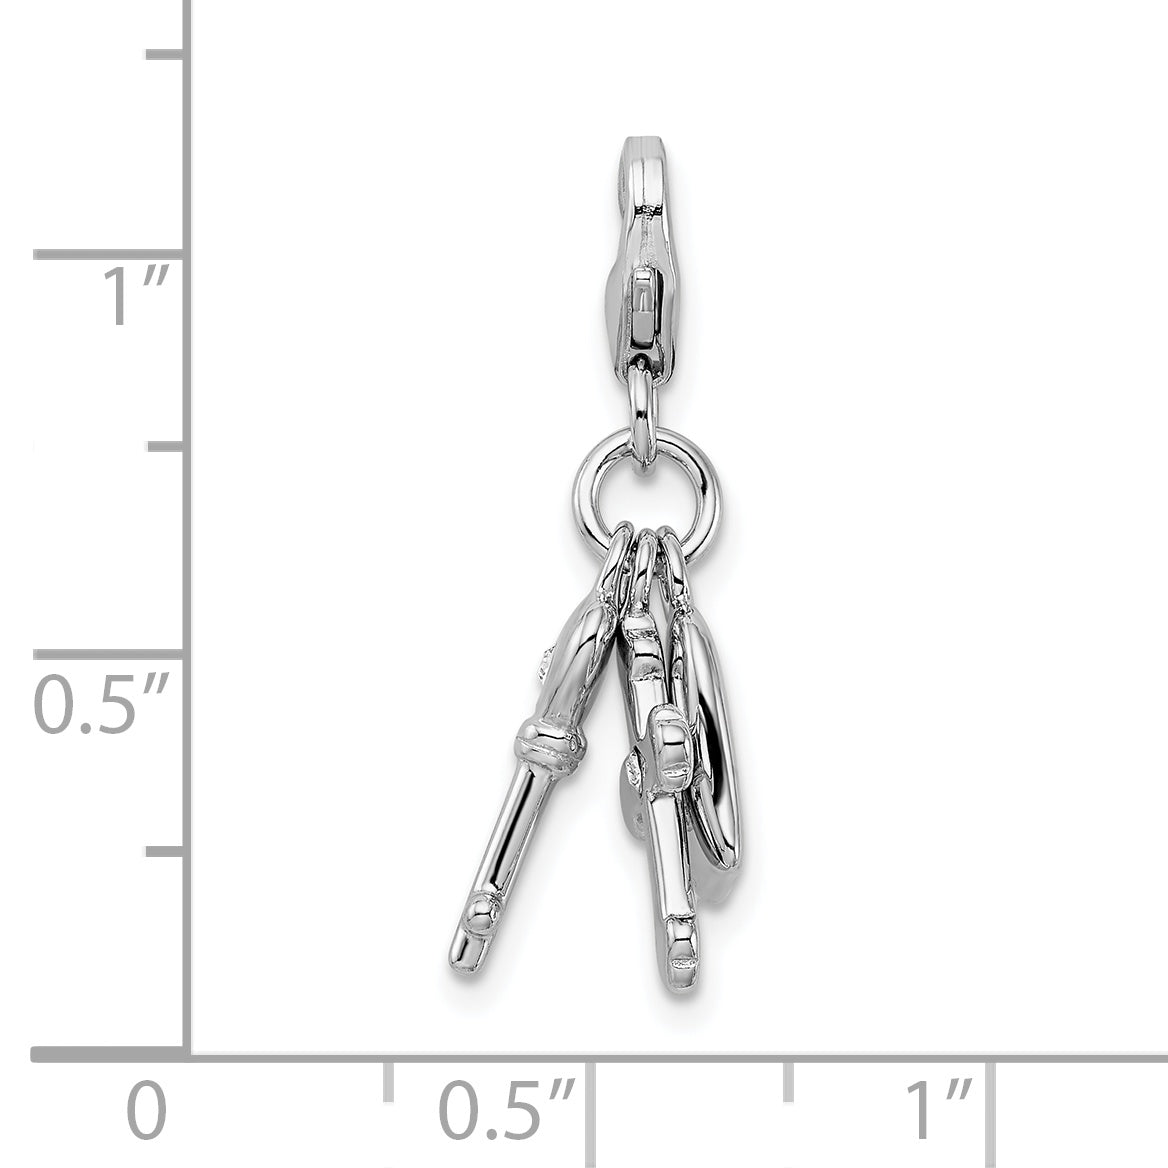 Amore La Vita Sterling Silver Rhodium-plated Polished Heart Cross and Key with Crystal From Swarovski Charm with Fancy Lobster Clasp